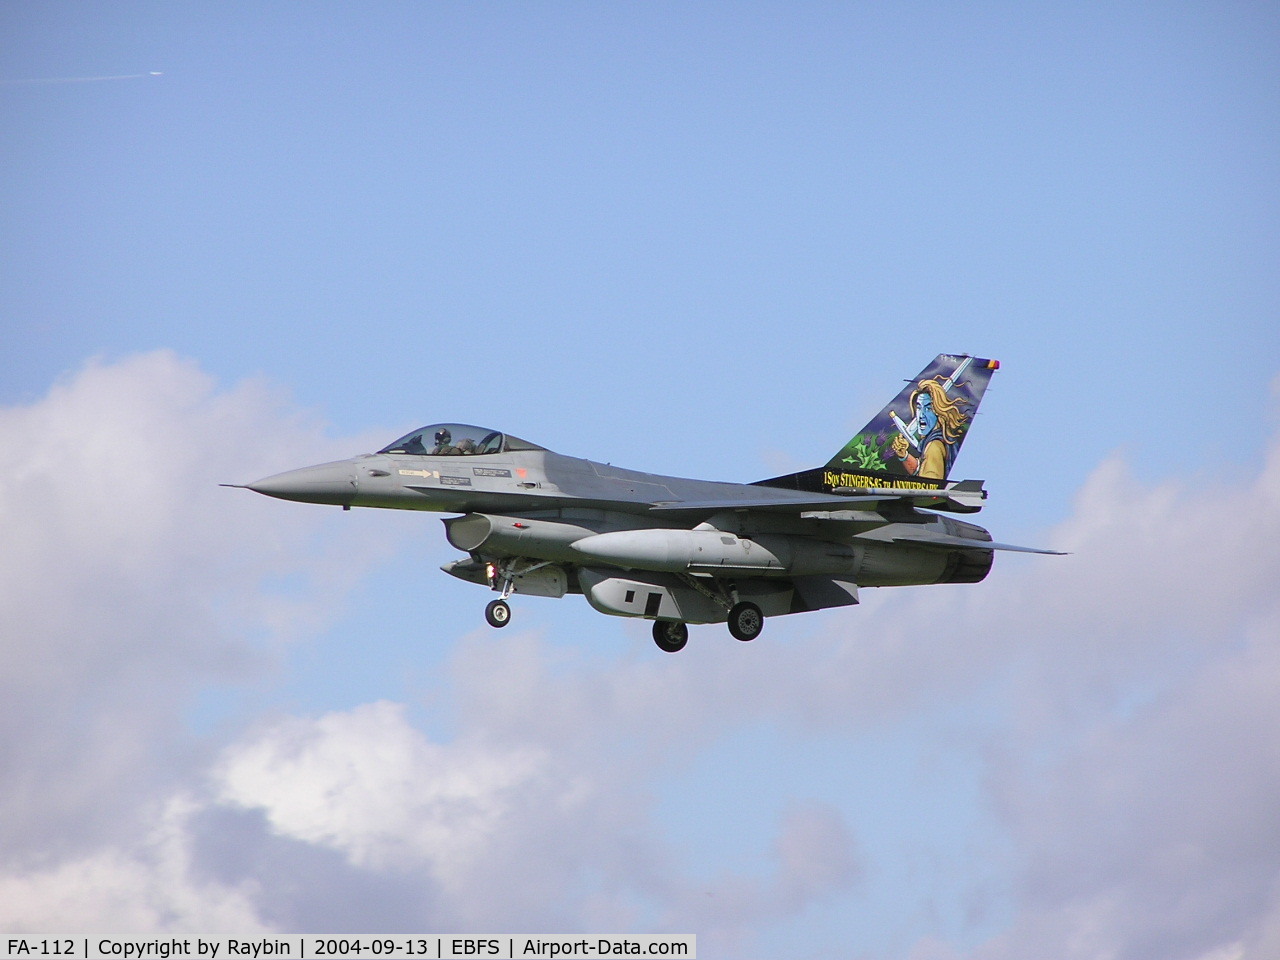 FA-112, 1989 SABCA F-16AM Fighting Falcon C/N 6H-112, Sadly crashed into the North Sea on Sept. 9th 2005
Special tail 